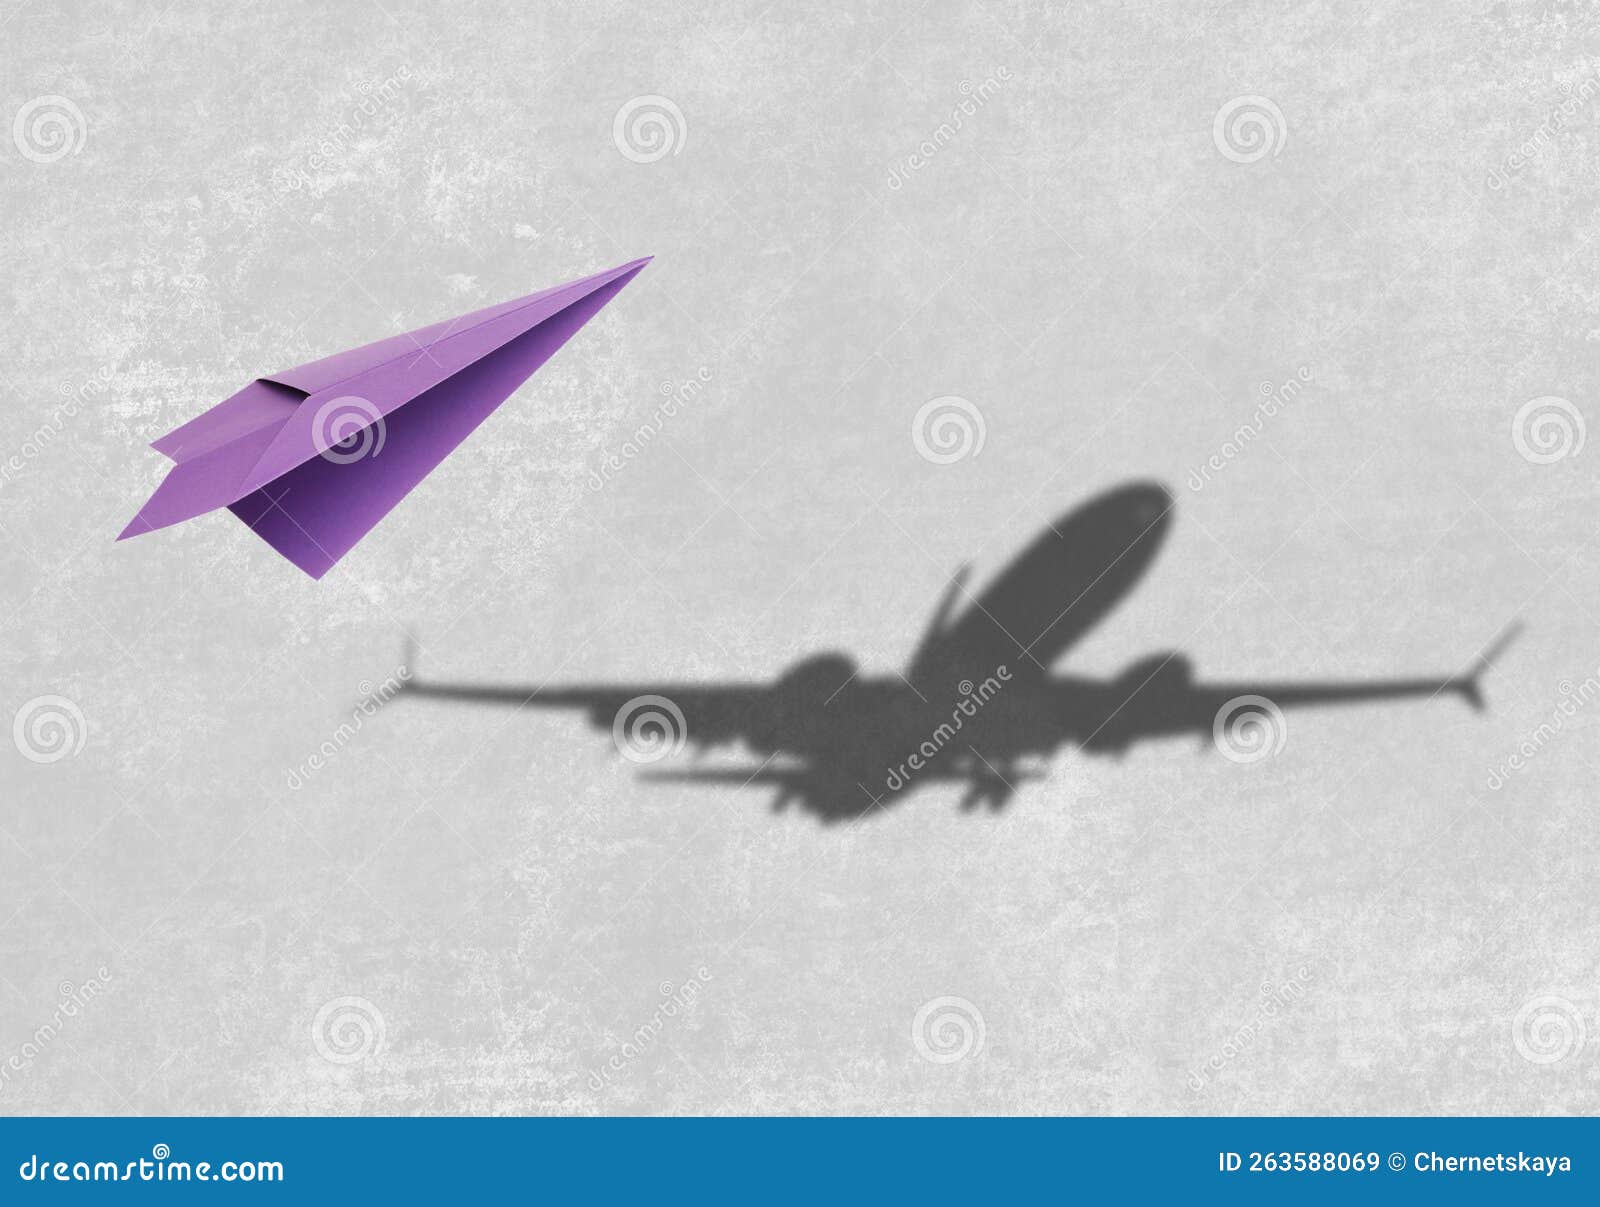 Flying Paper Plane and Shadow of a Real Airplane on Grey Background ...